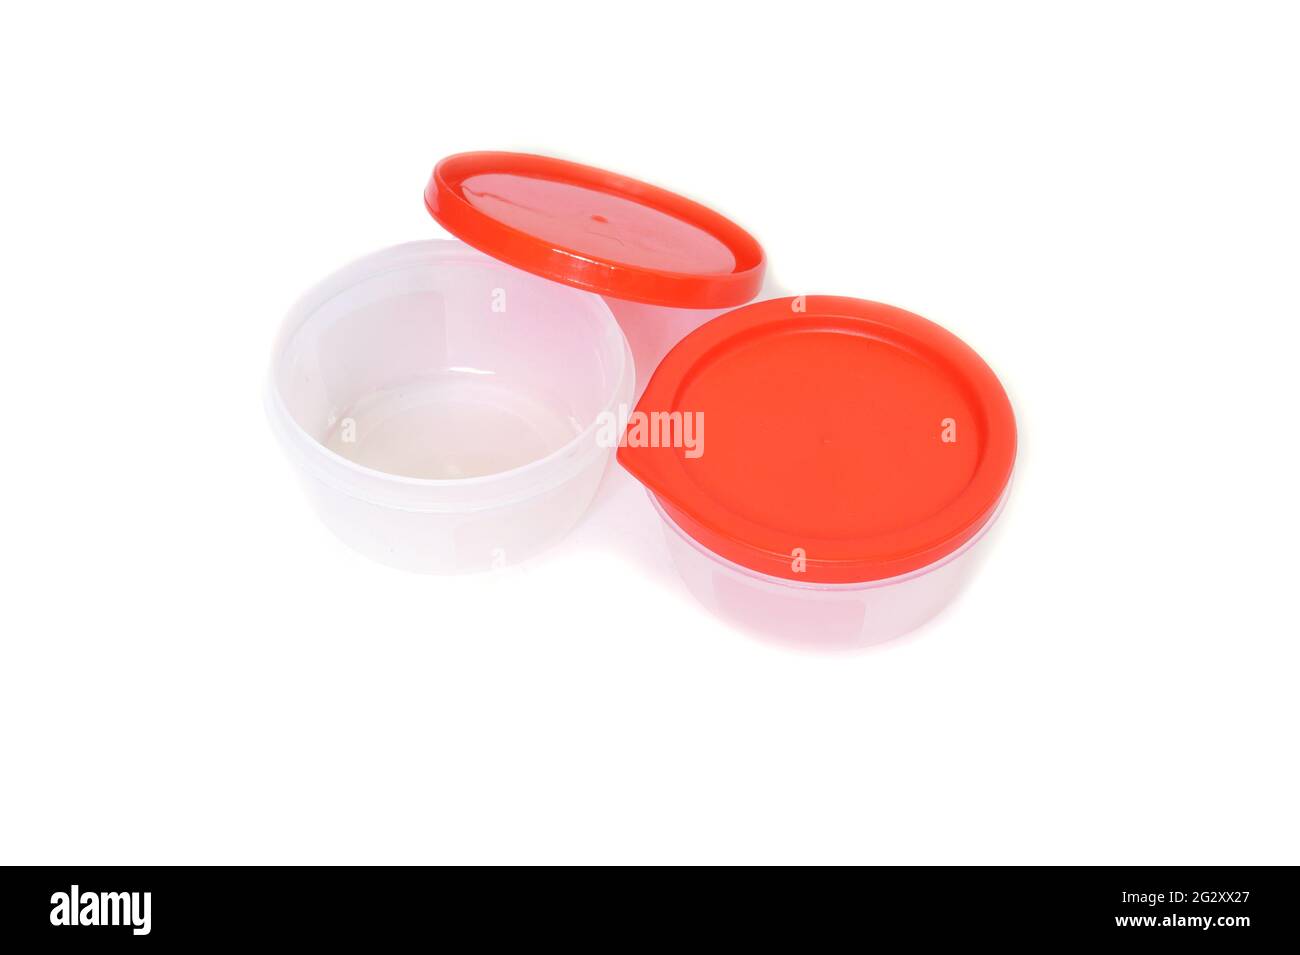 Round Plastic containers in a white background Stock Photo